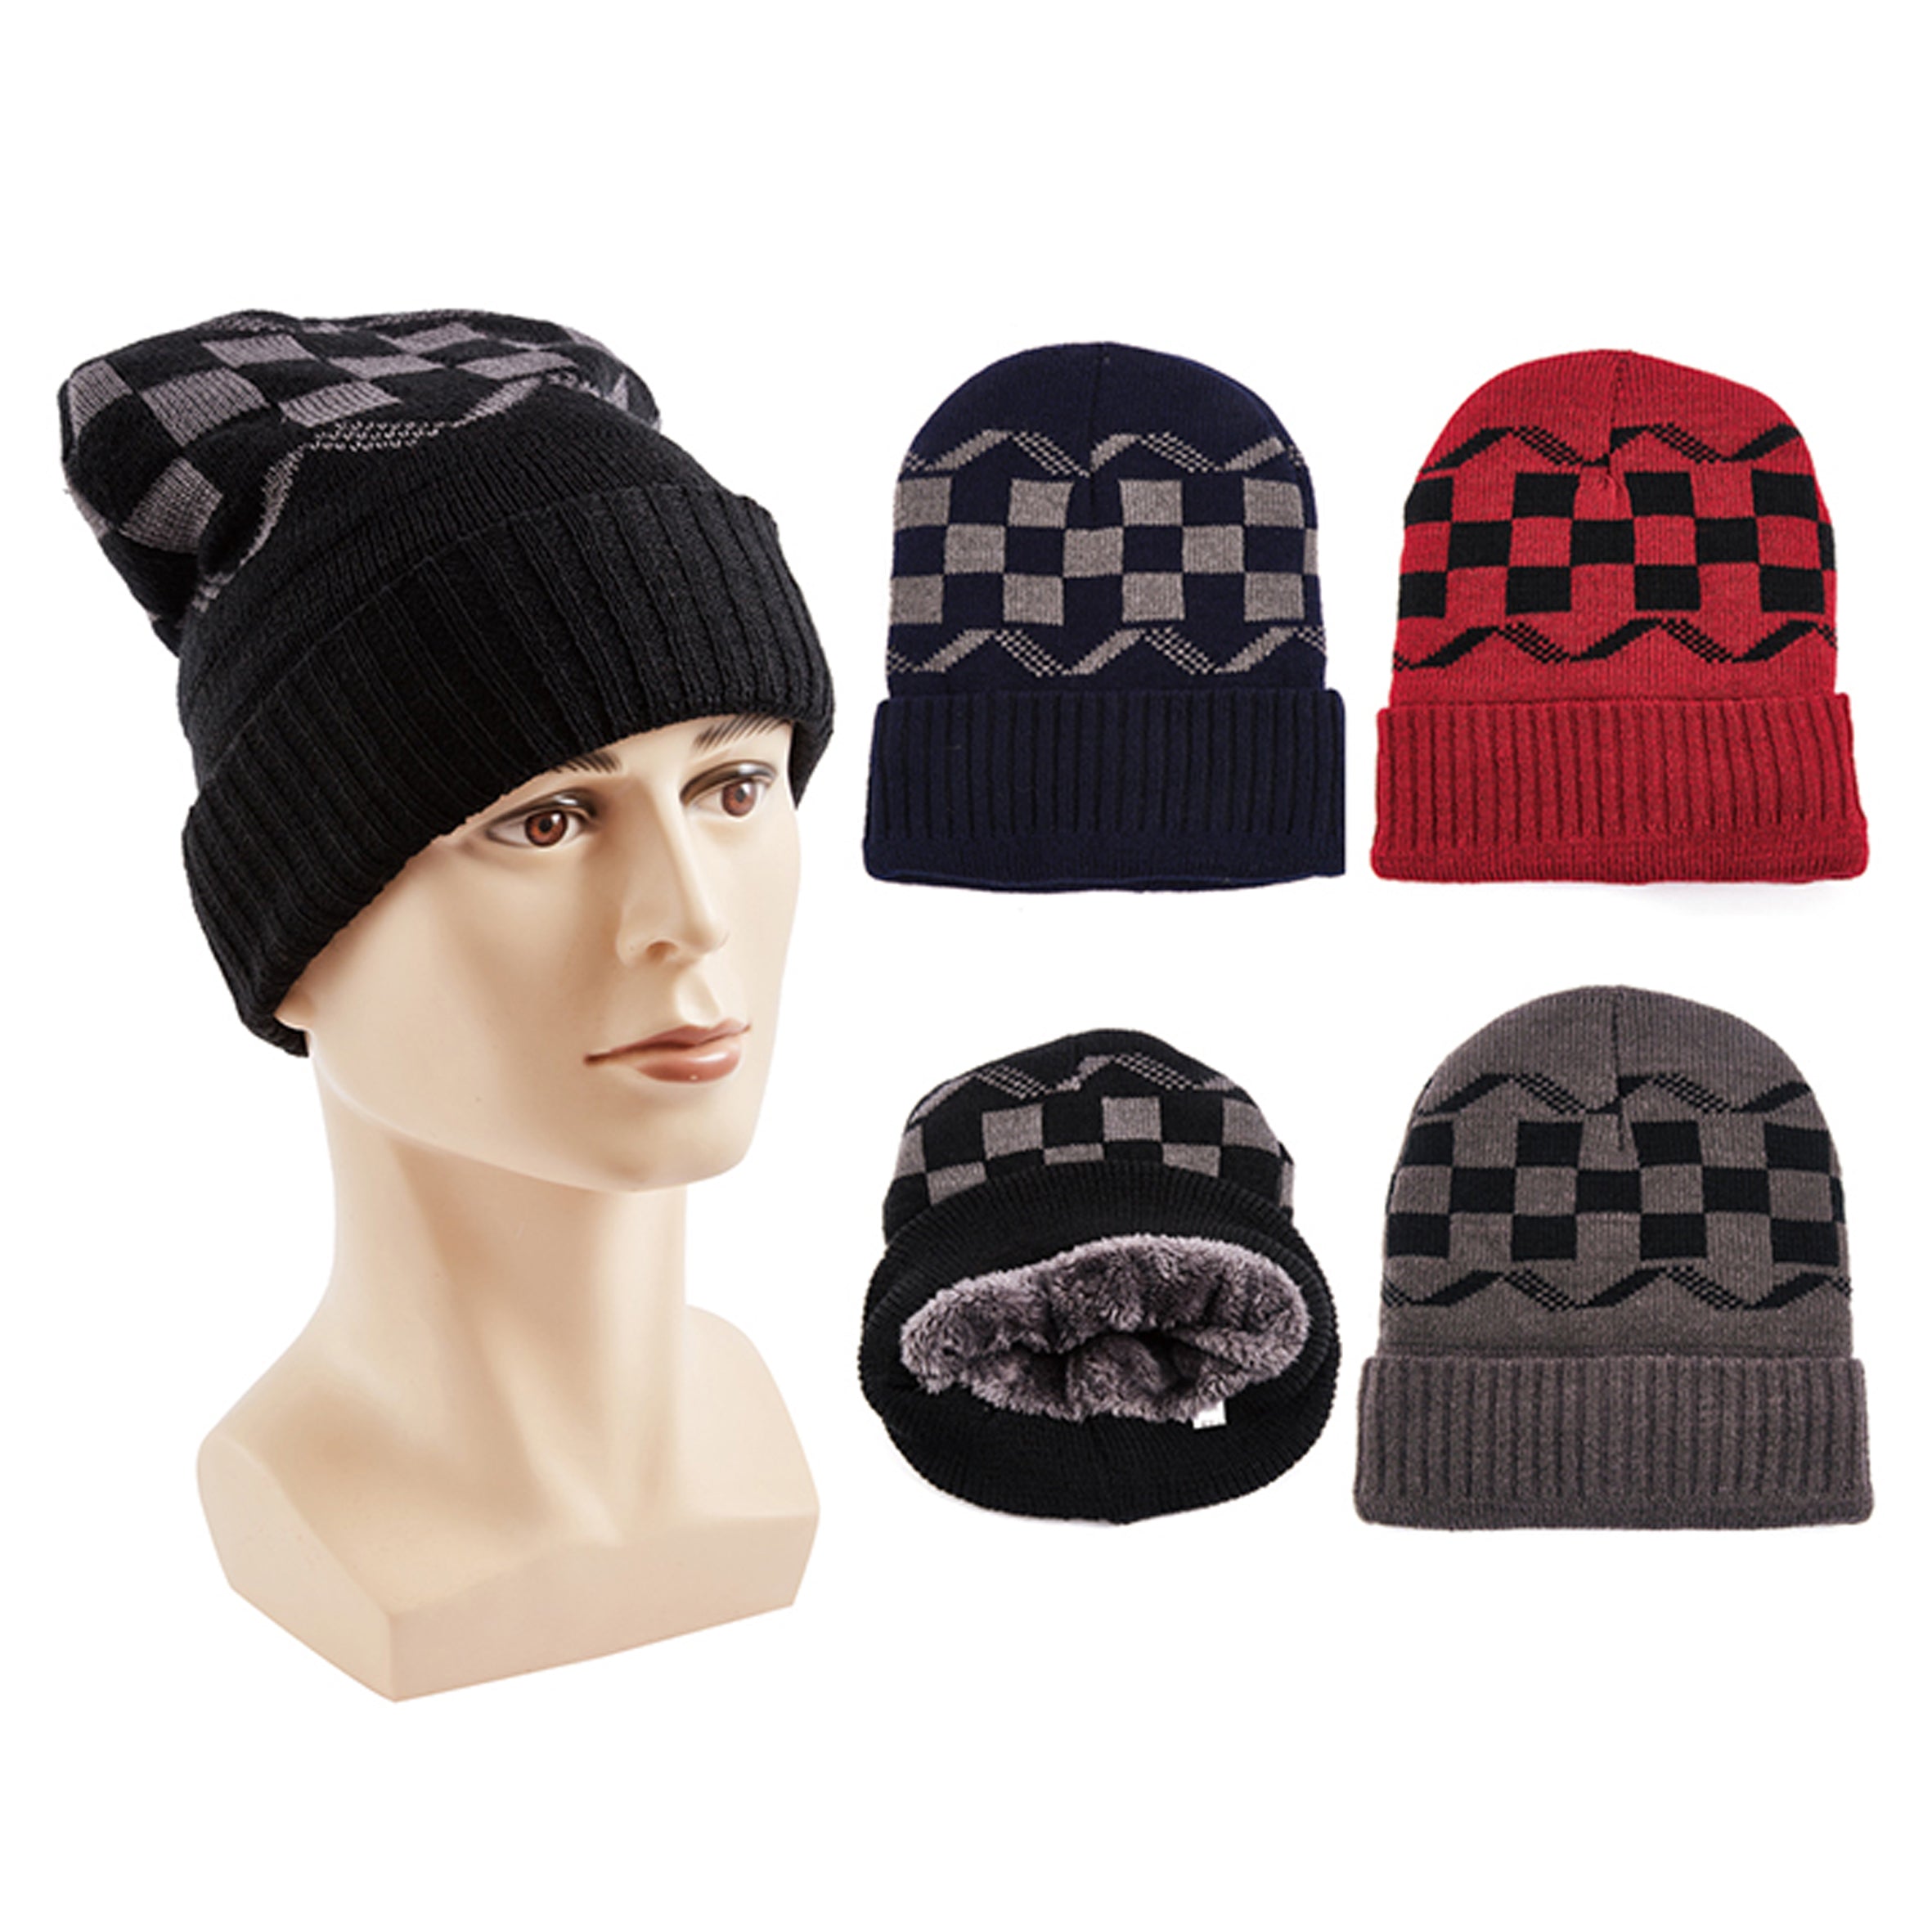 Wholesale CLOTHING Accessories Wave Square Men's Winter Hat NH294